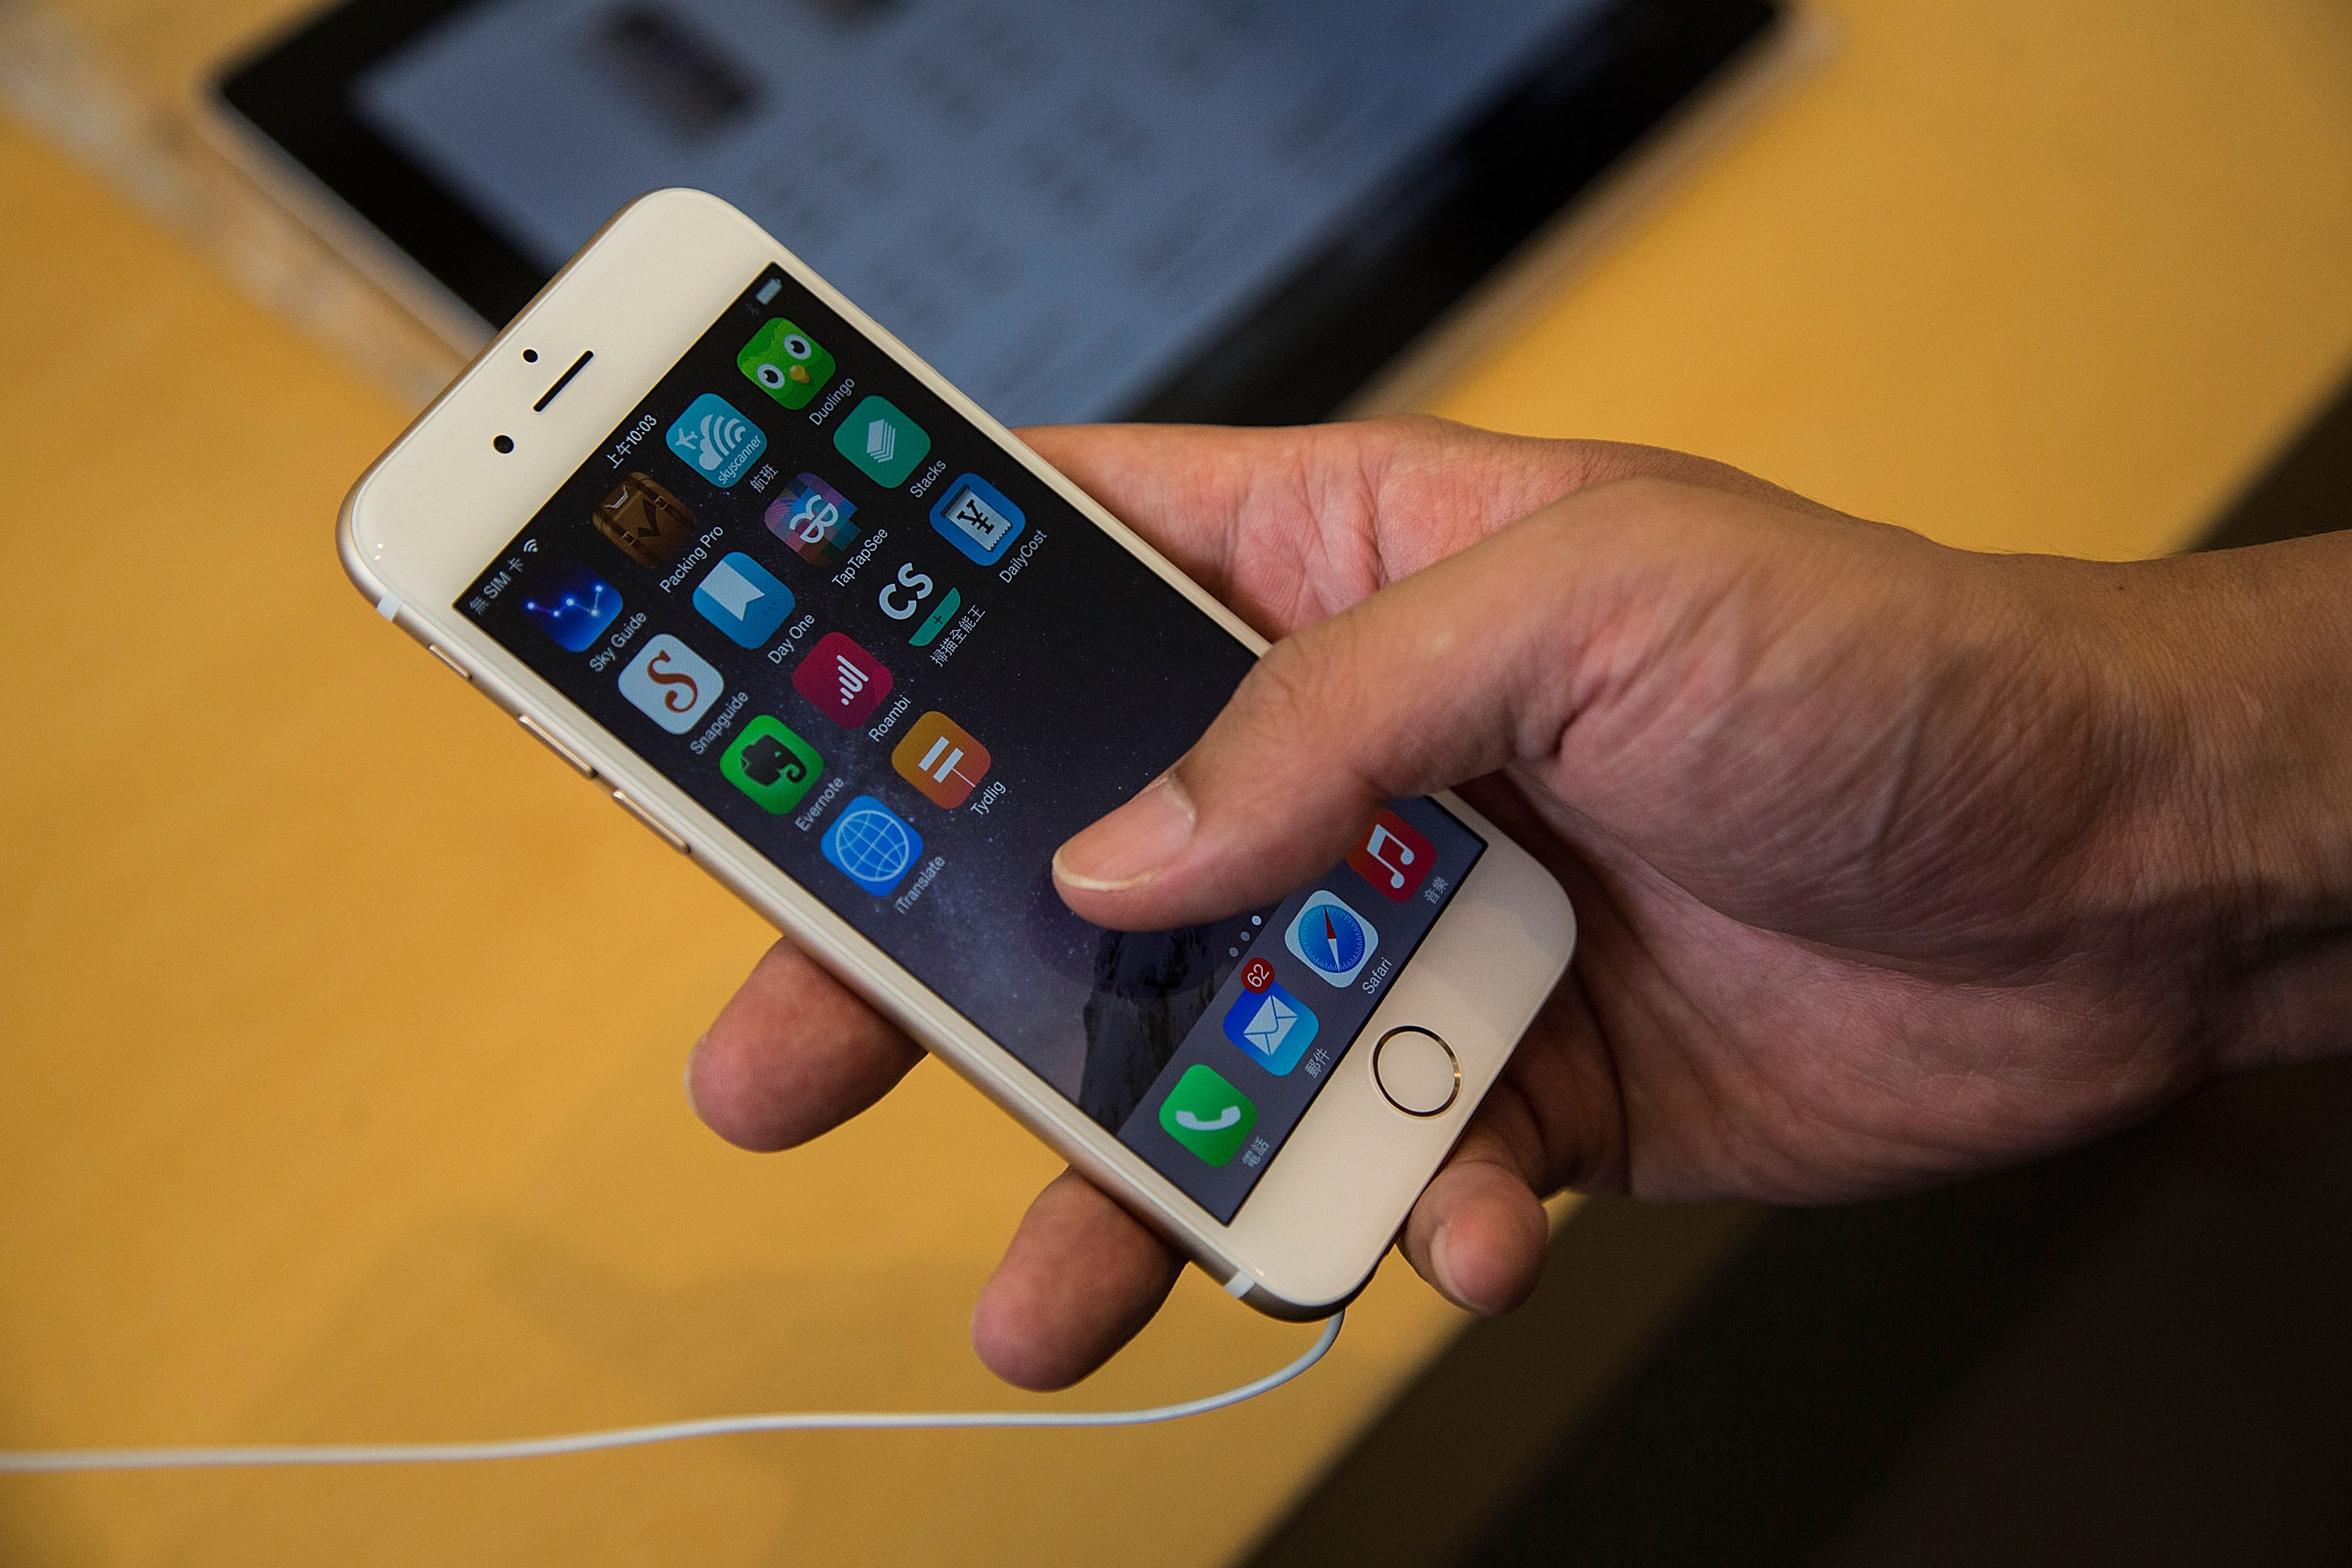 iPhone 6 Becomes Available In Hong Kong